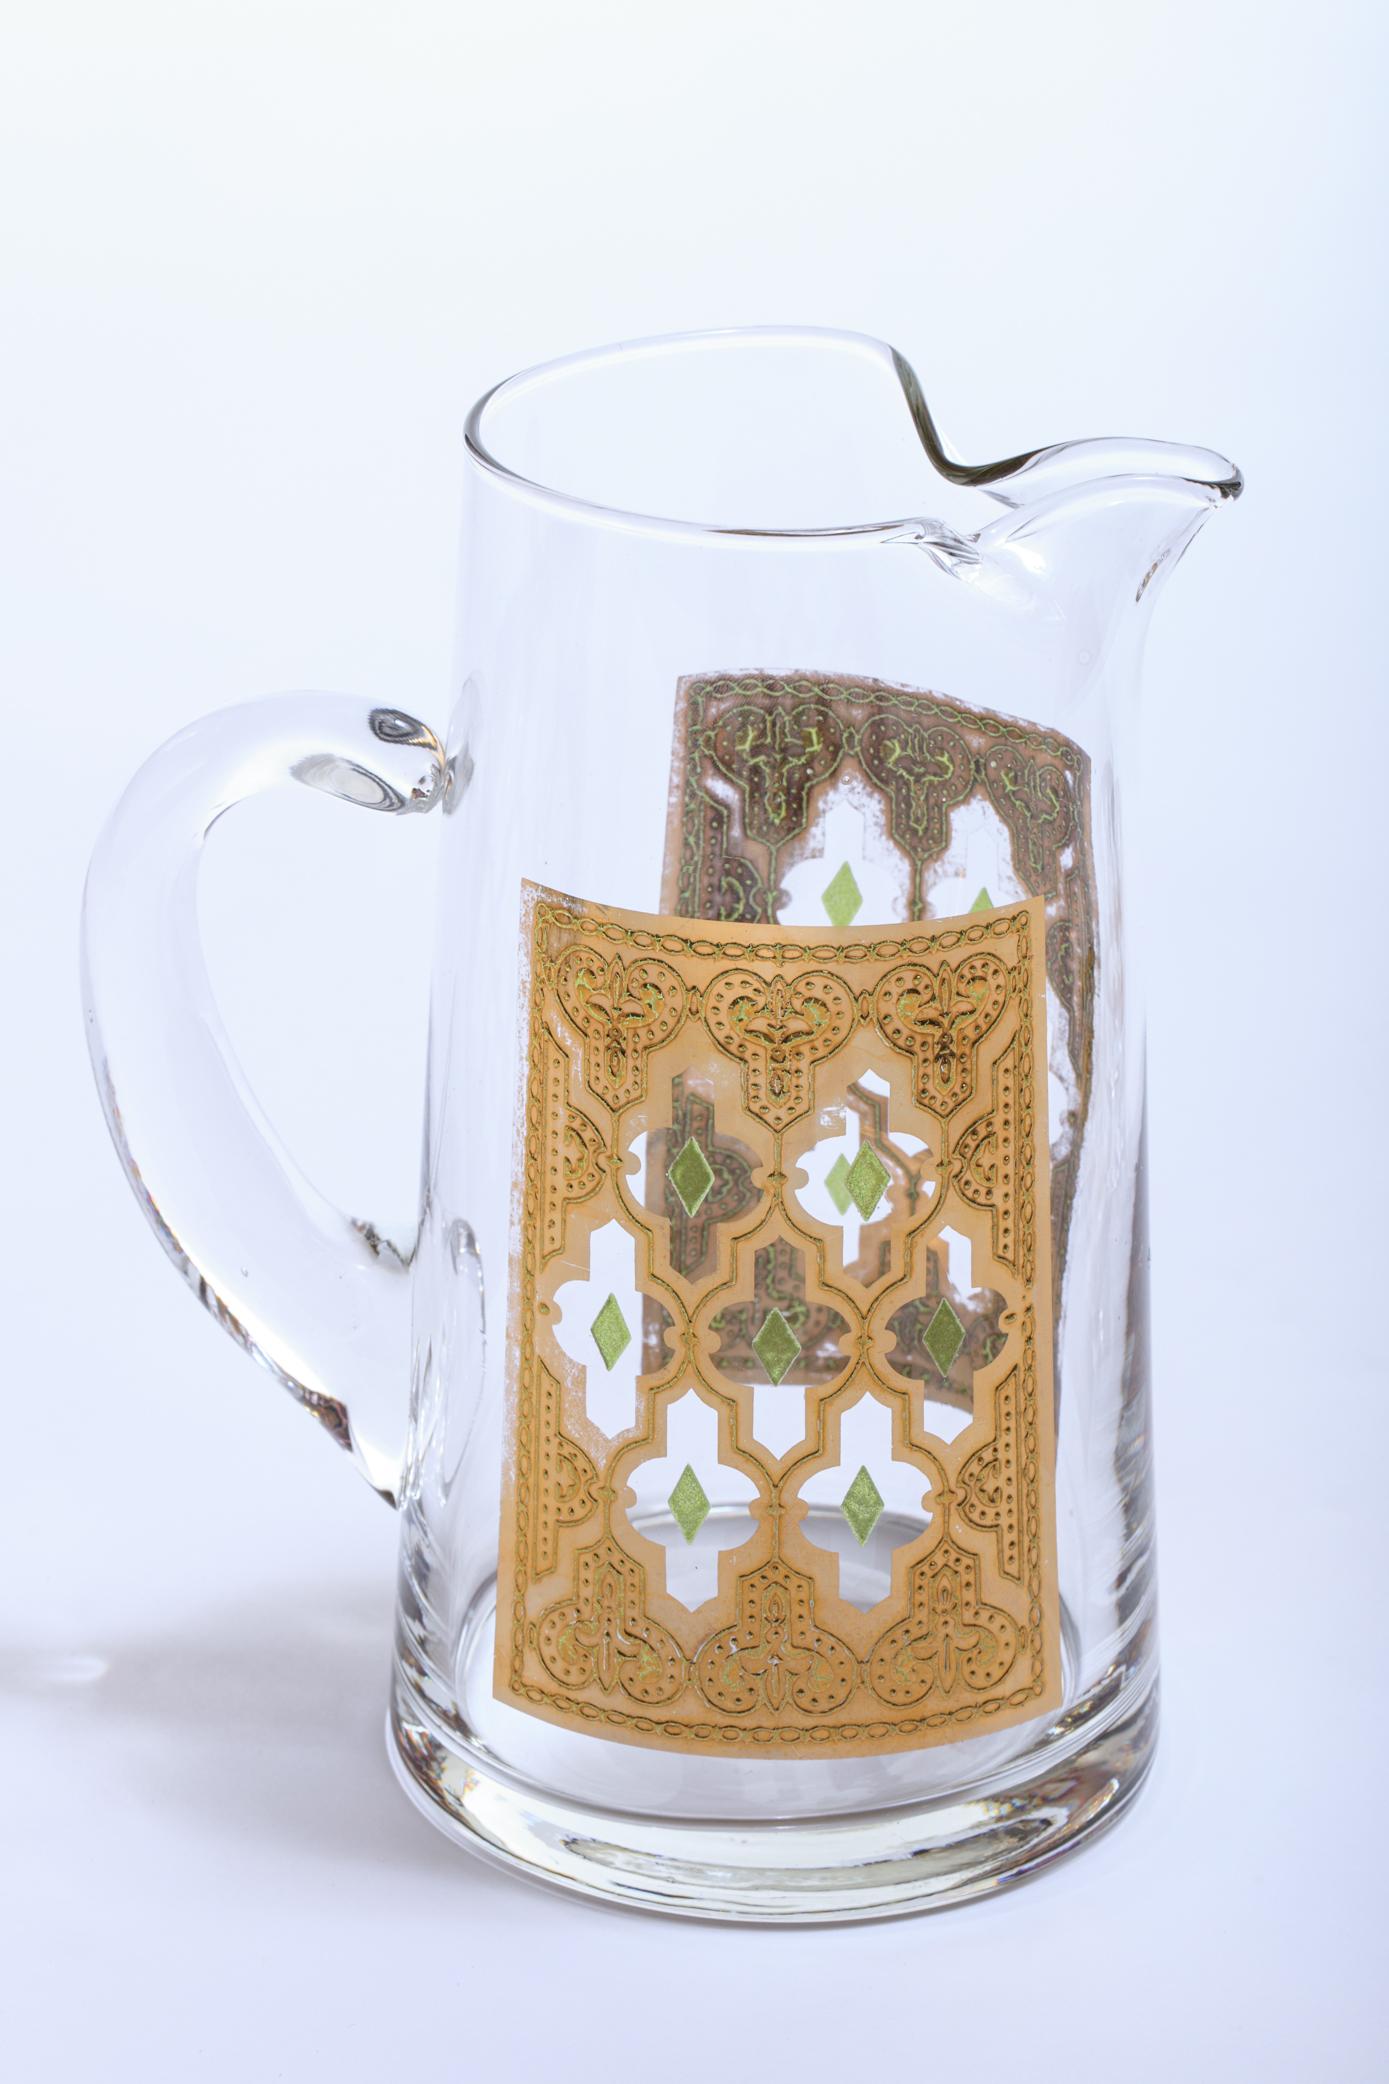 Beautiful Moroccan themed vintage beverage or water pitcher with pair of matching glasses, circa 1965. All pieces show no wear and are in great condition. This style was showcased in the feature film 